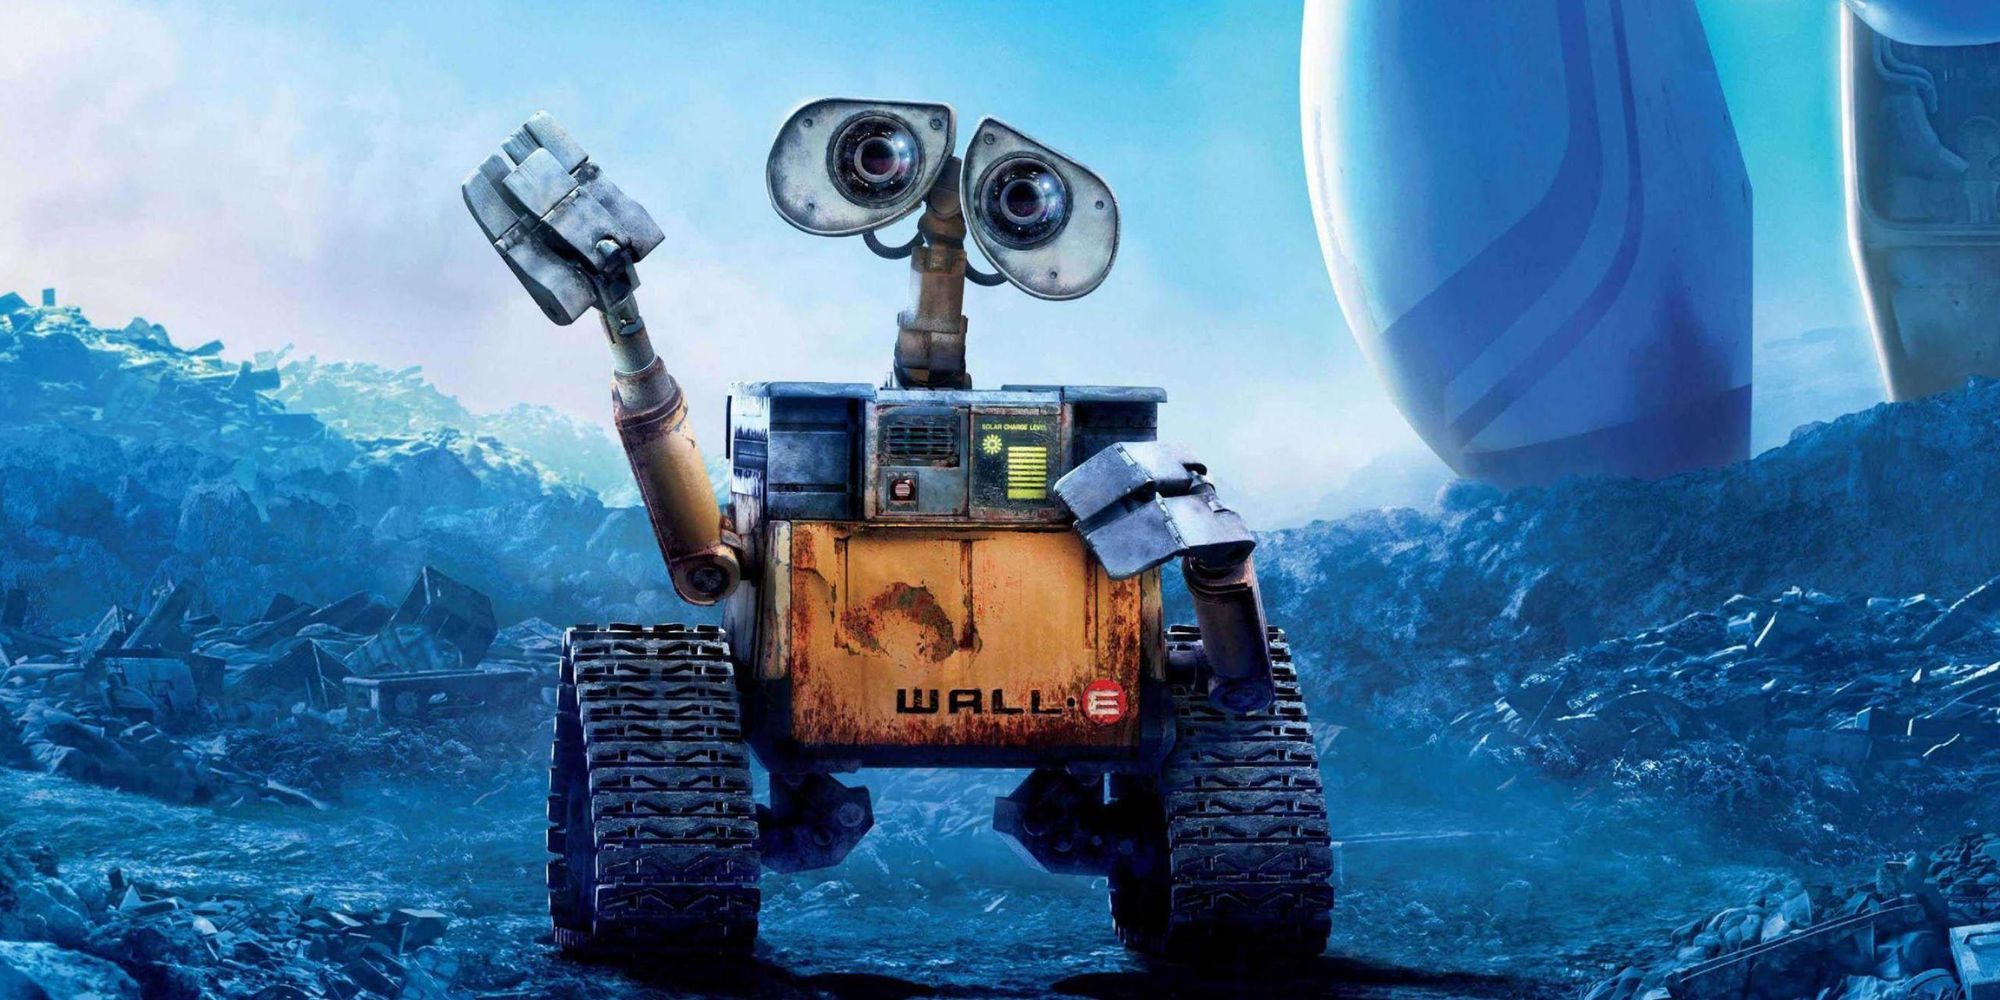 Promotional image for 'WALL-E'